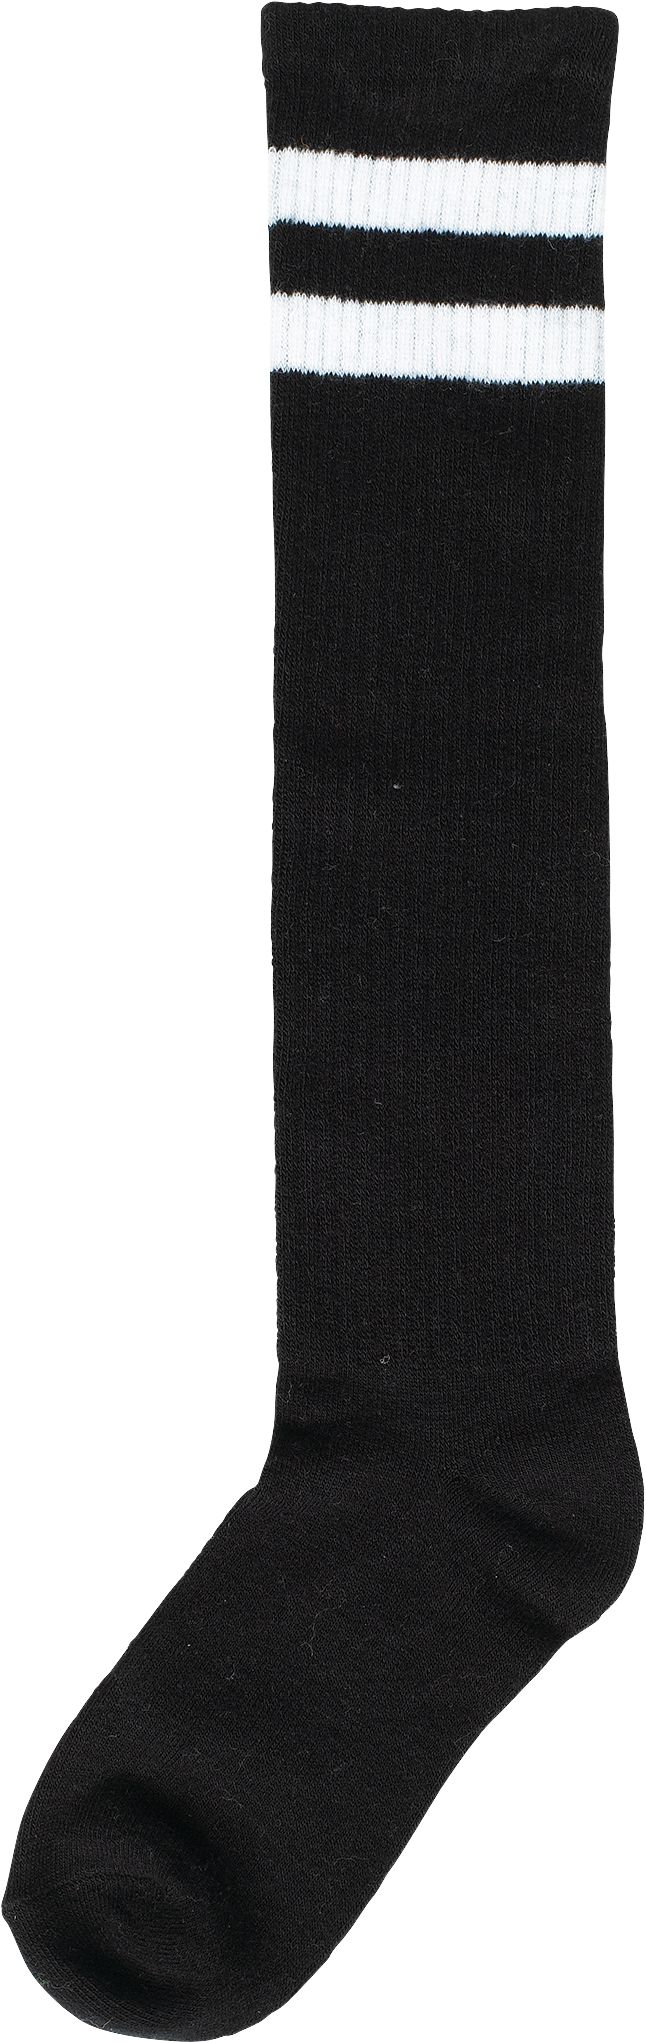 Adult Athletic Knee High Socks, Assorted Colours Striped, One Size